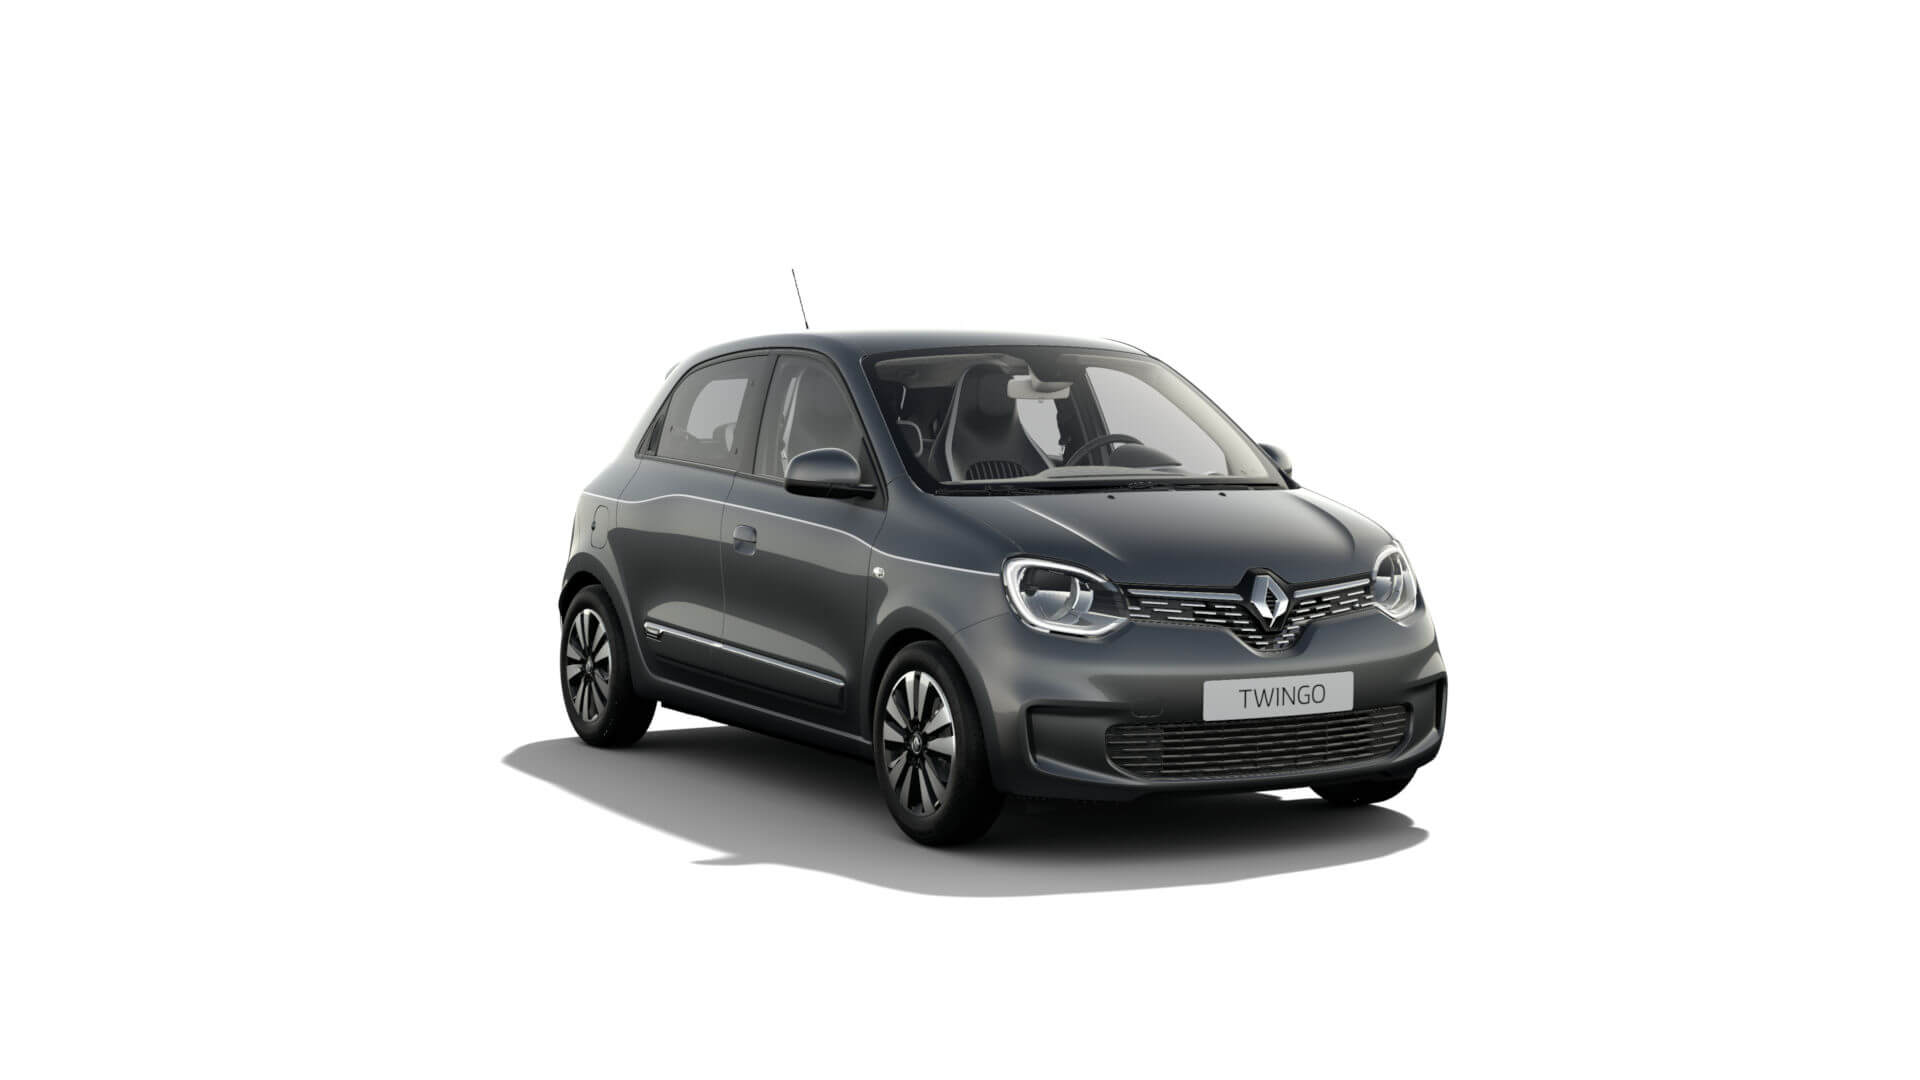 Automodell Anthrazit - Renault Twingo - Renault Ahrens Hannover